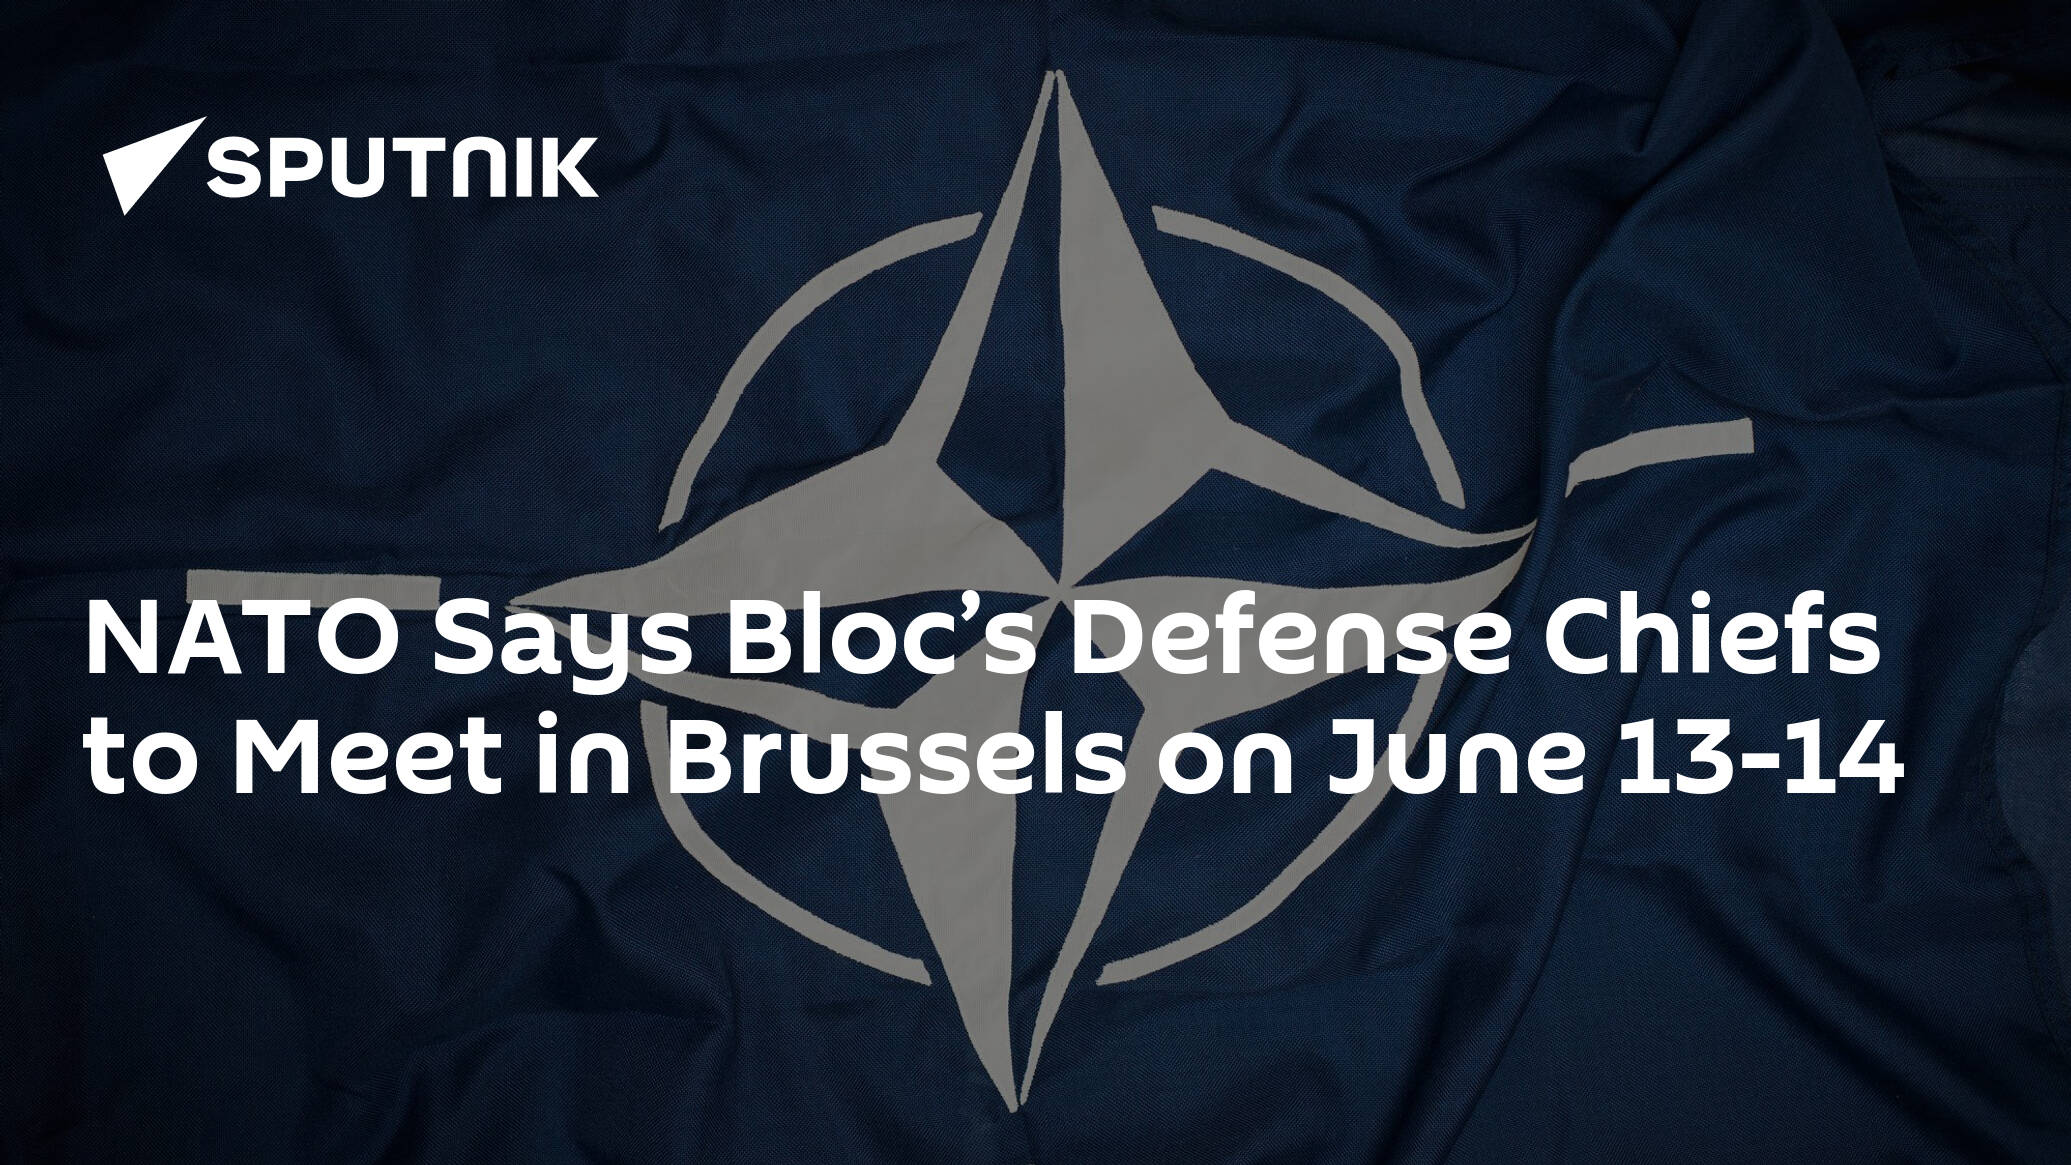 NATO Defense Ministers Will Hold Meeting in Brussels From June 13-14 – Alliance